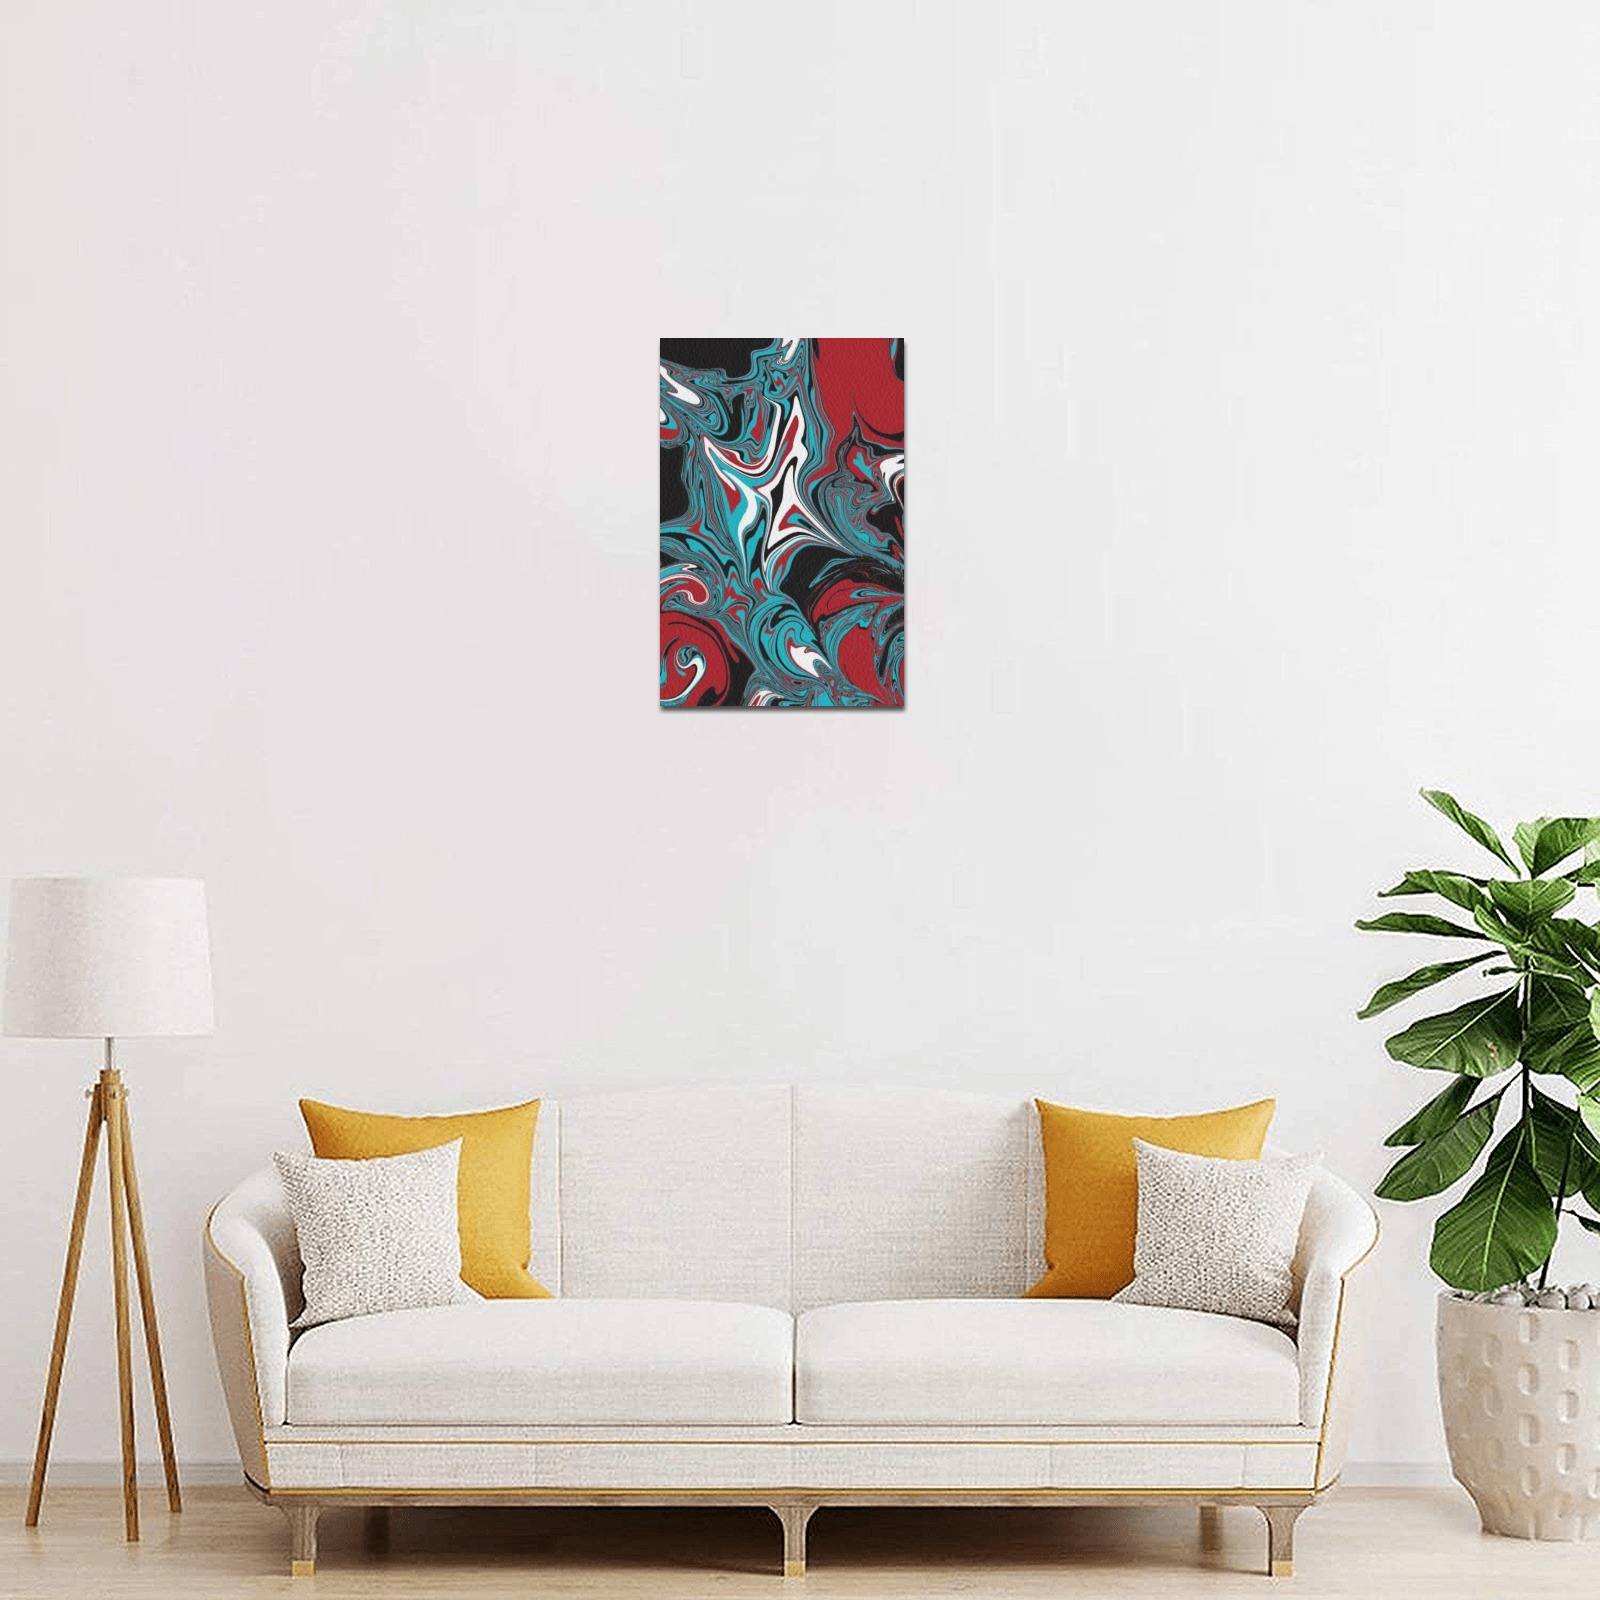 Dark Wave of Colors Frame Canvas Print 8"x12"